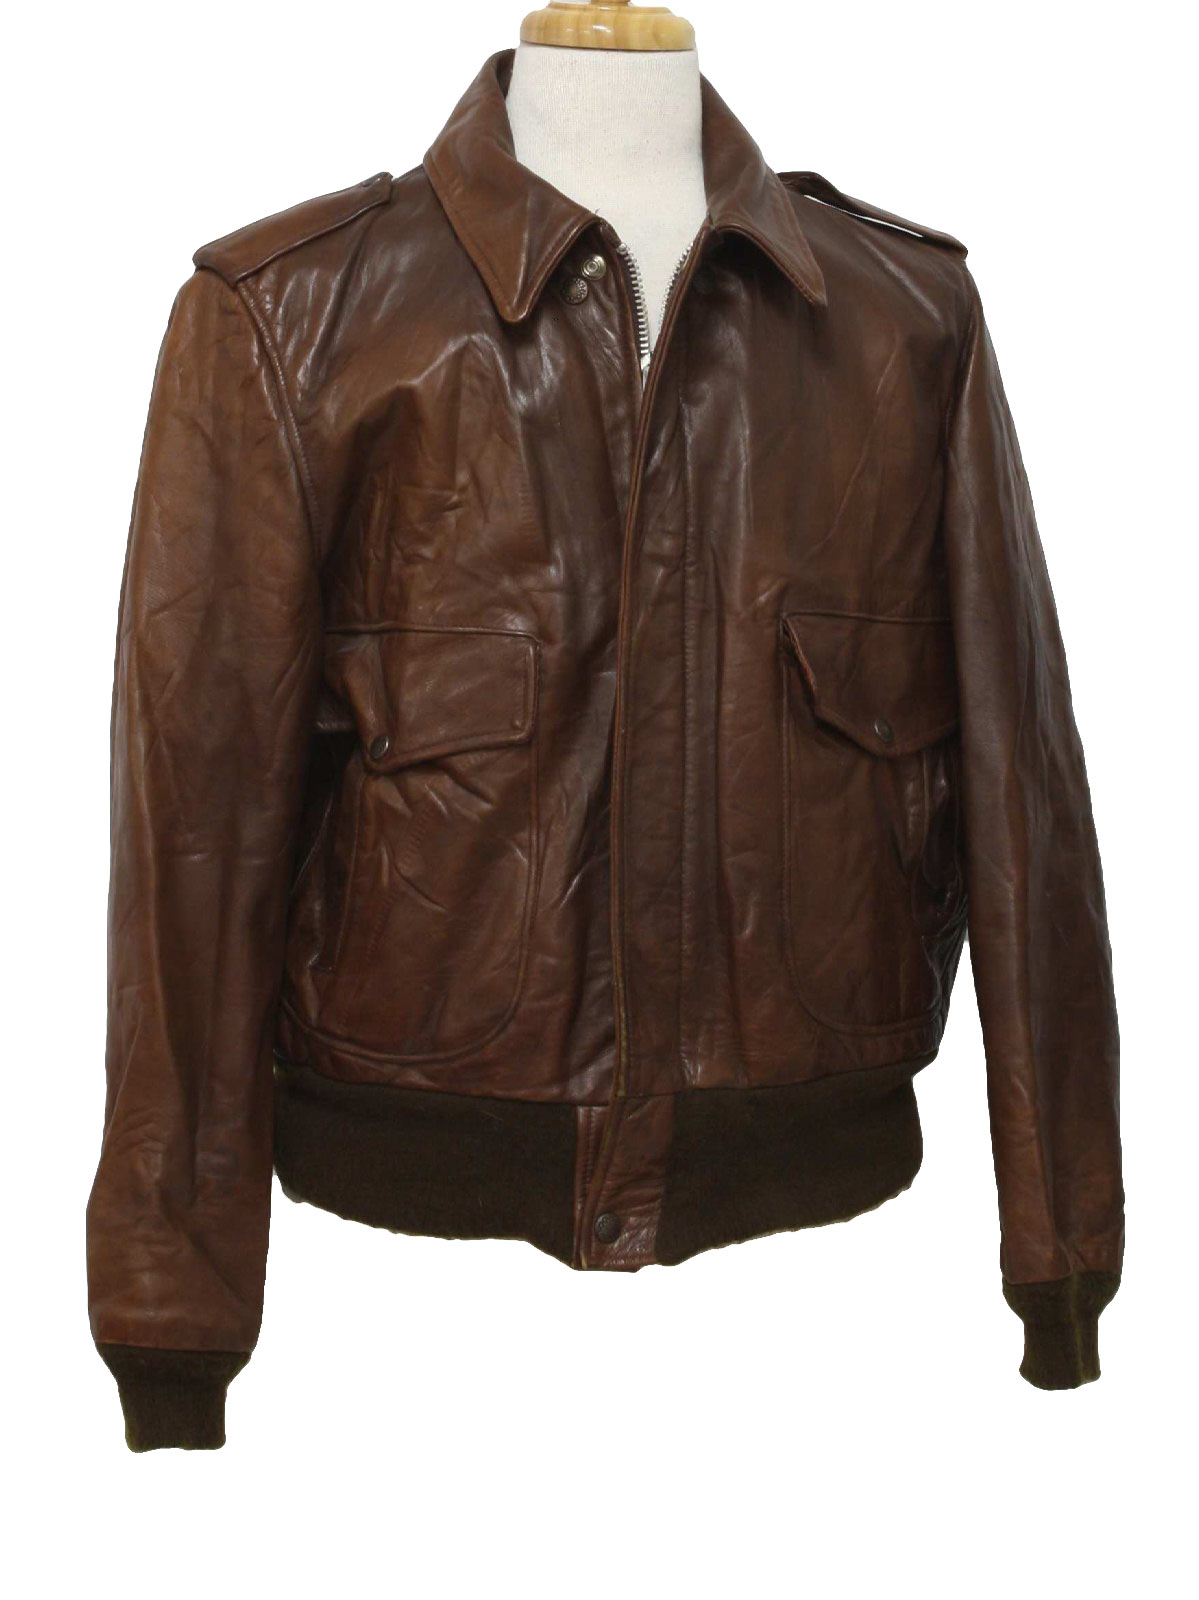 Retro 1970s Leather Jacket: 70s -Missing Label- Mens brown leather ...